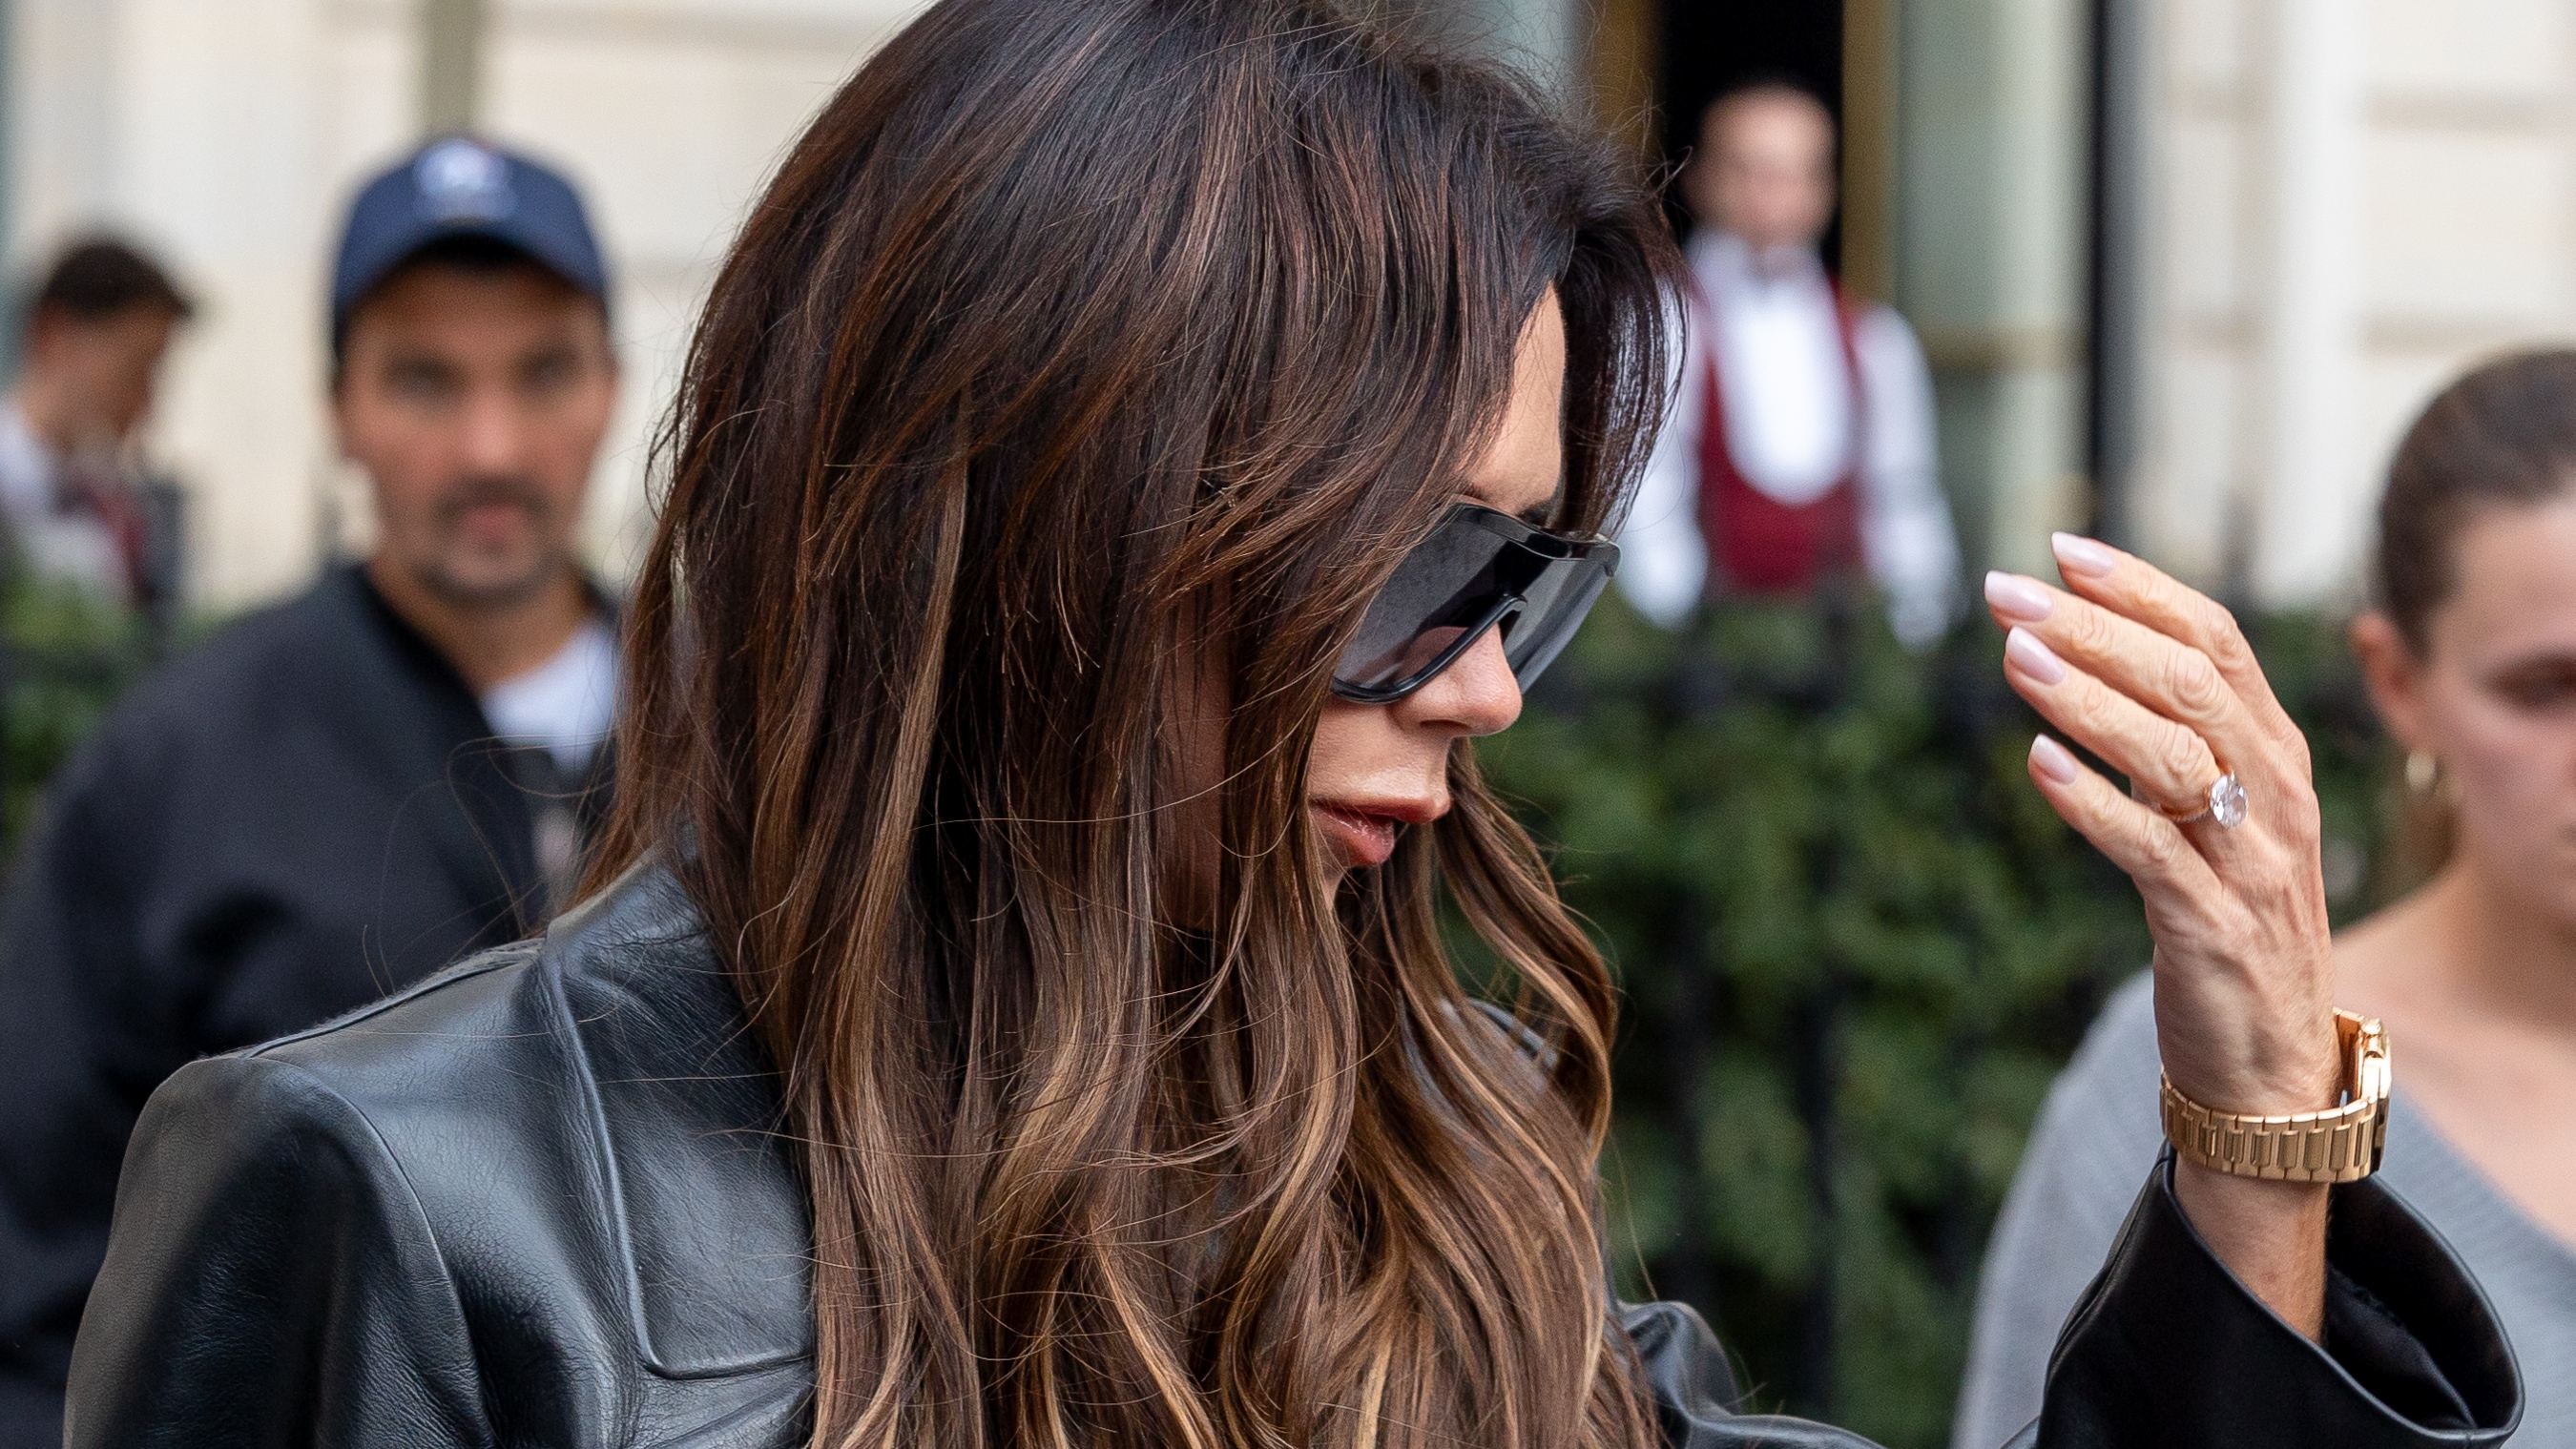 Victoria Beckham's jeans and sweatshirt look is so cool and casual